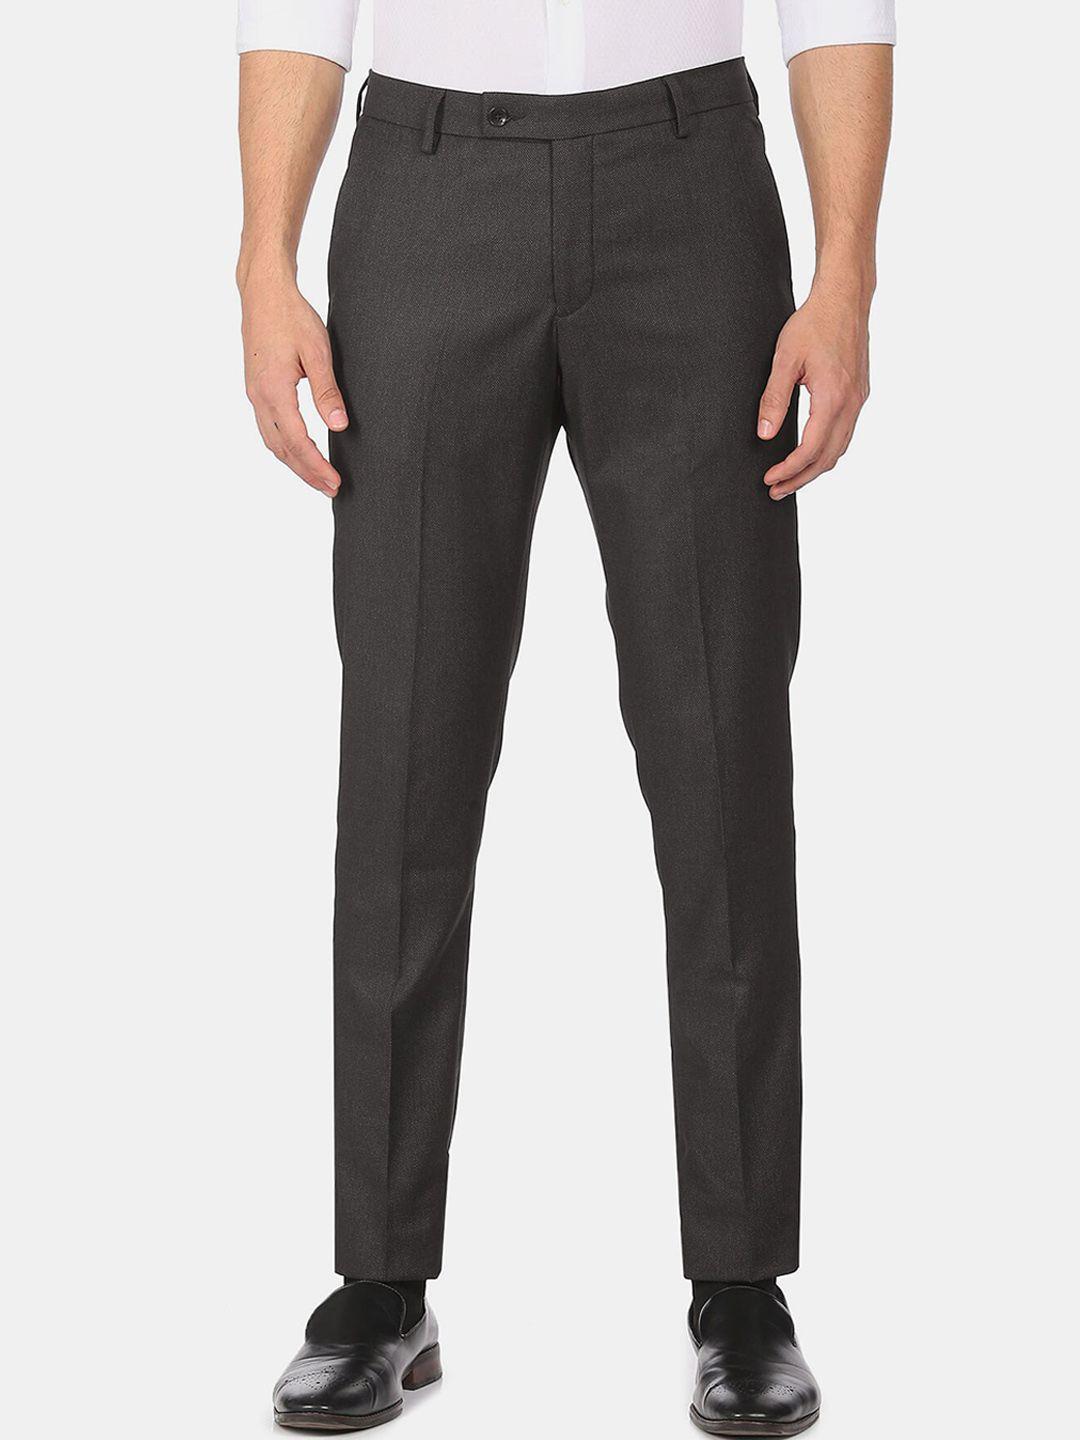 arrow-men-grey-solid-mid-rise-formal-trousers